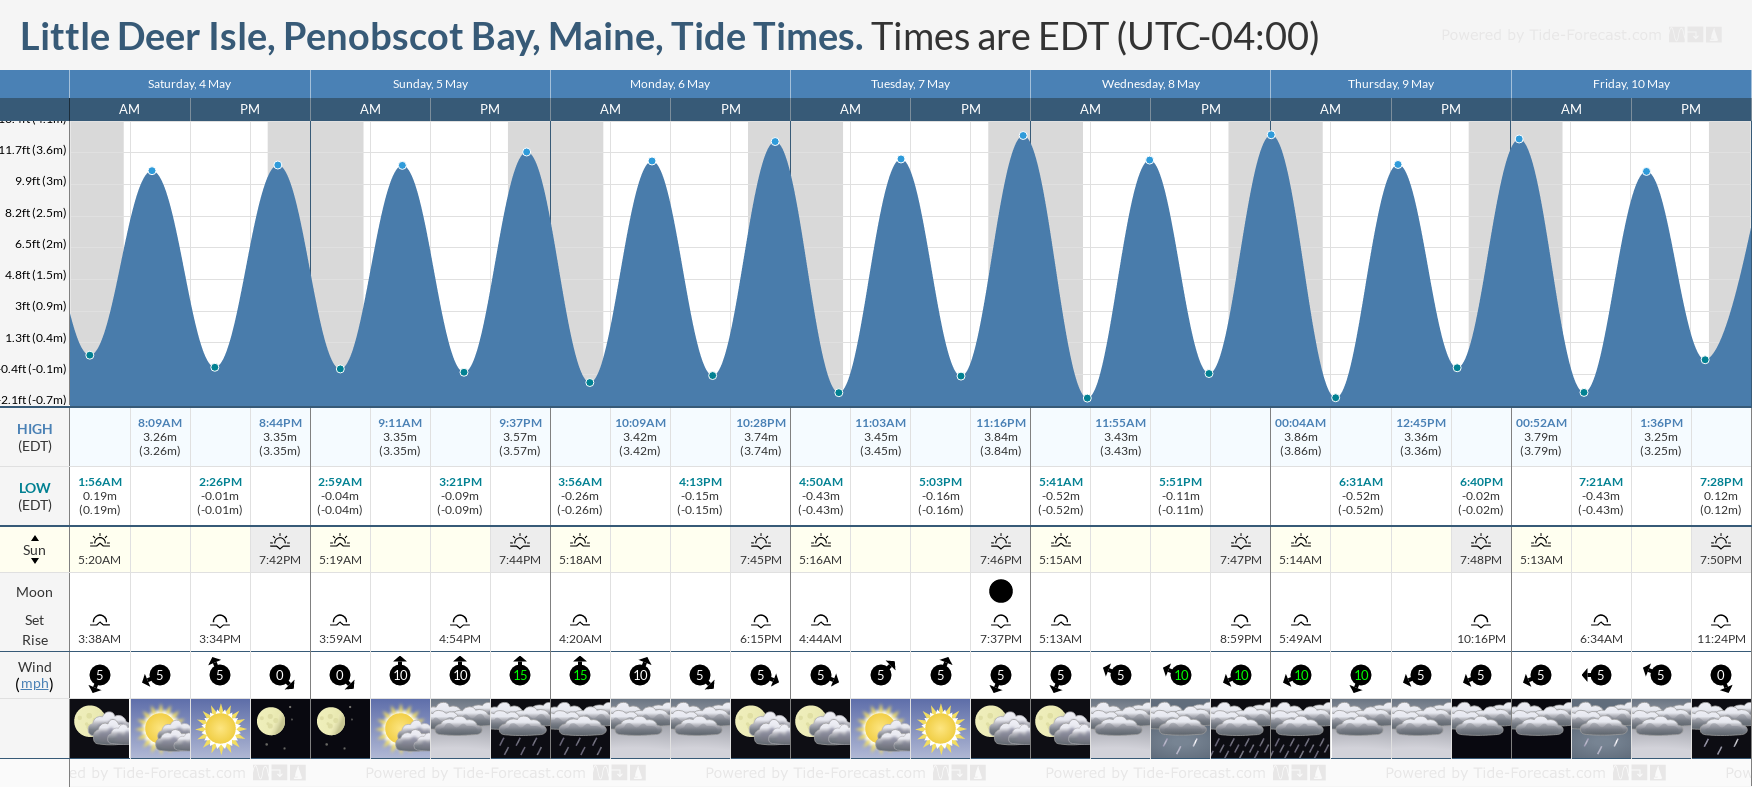 Little Deer Isle, Penobscot Bay, Maine Tide Chart including high and low tide tide times for the next 7 days